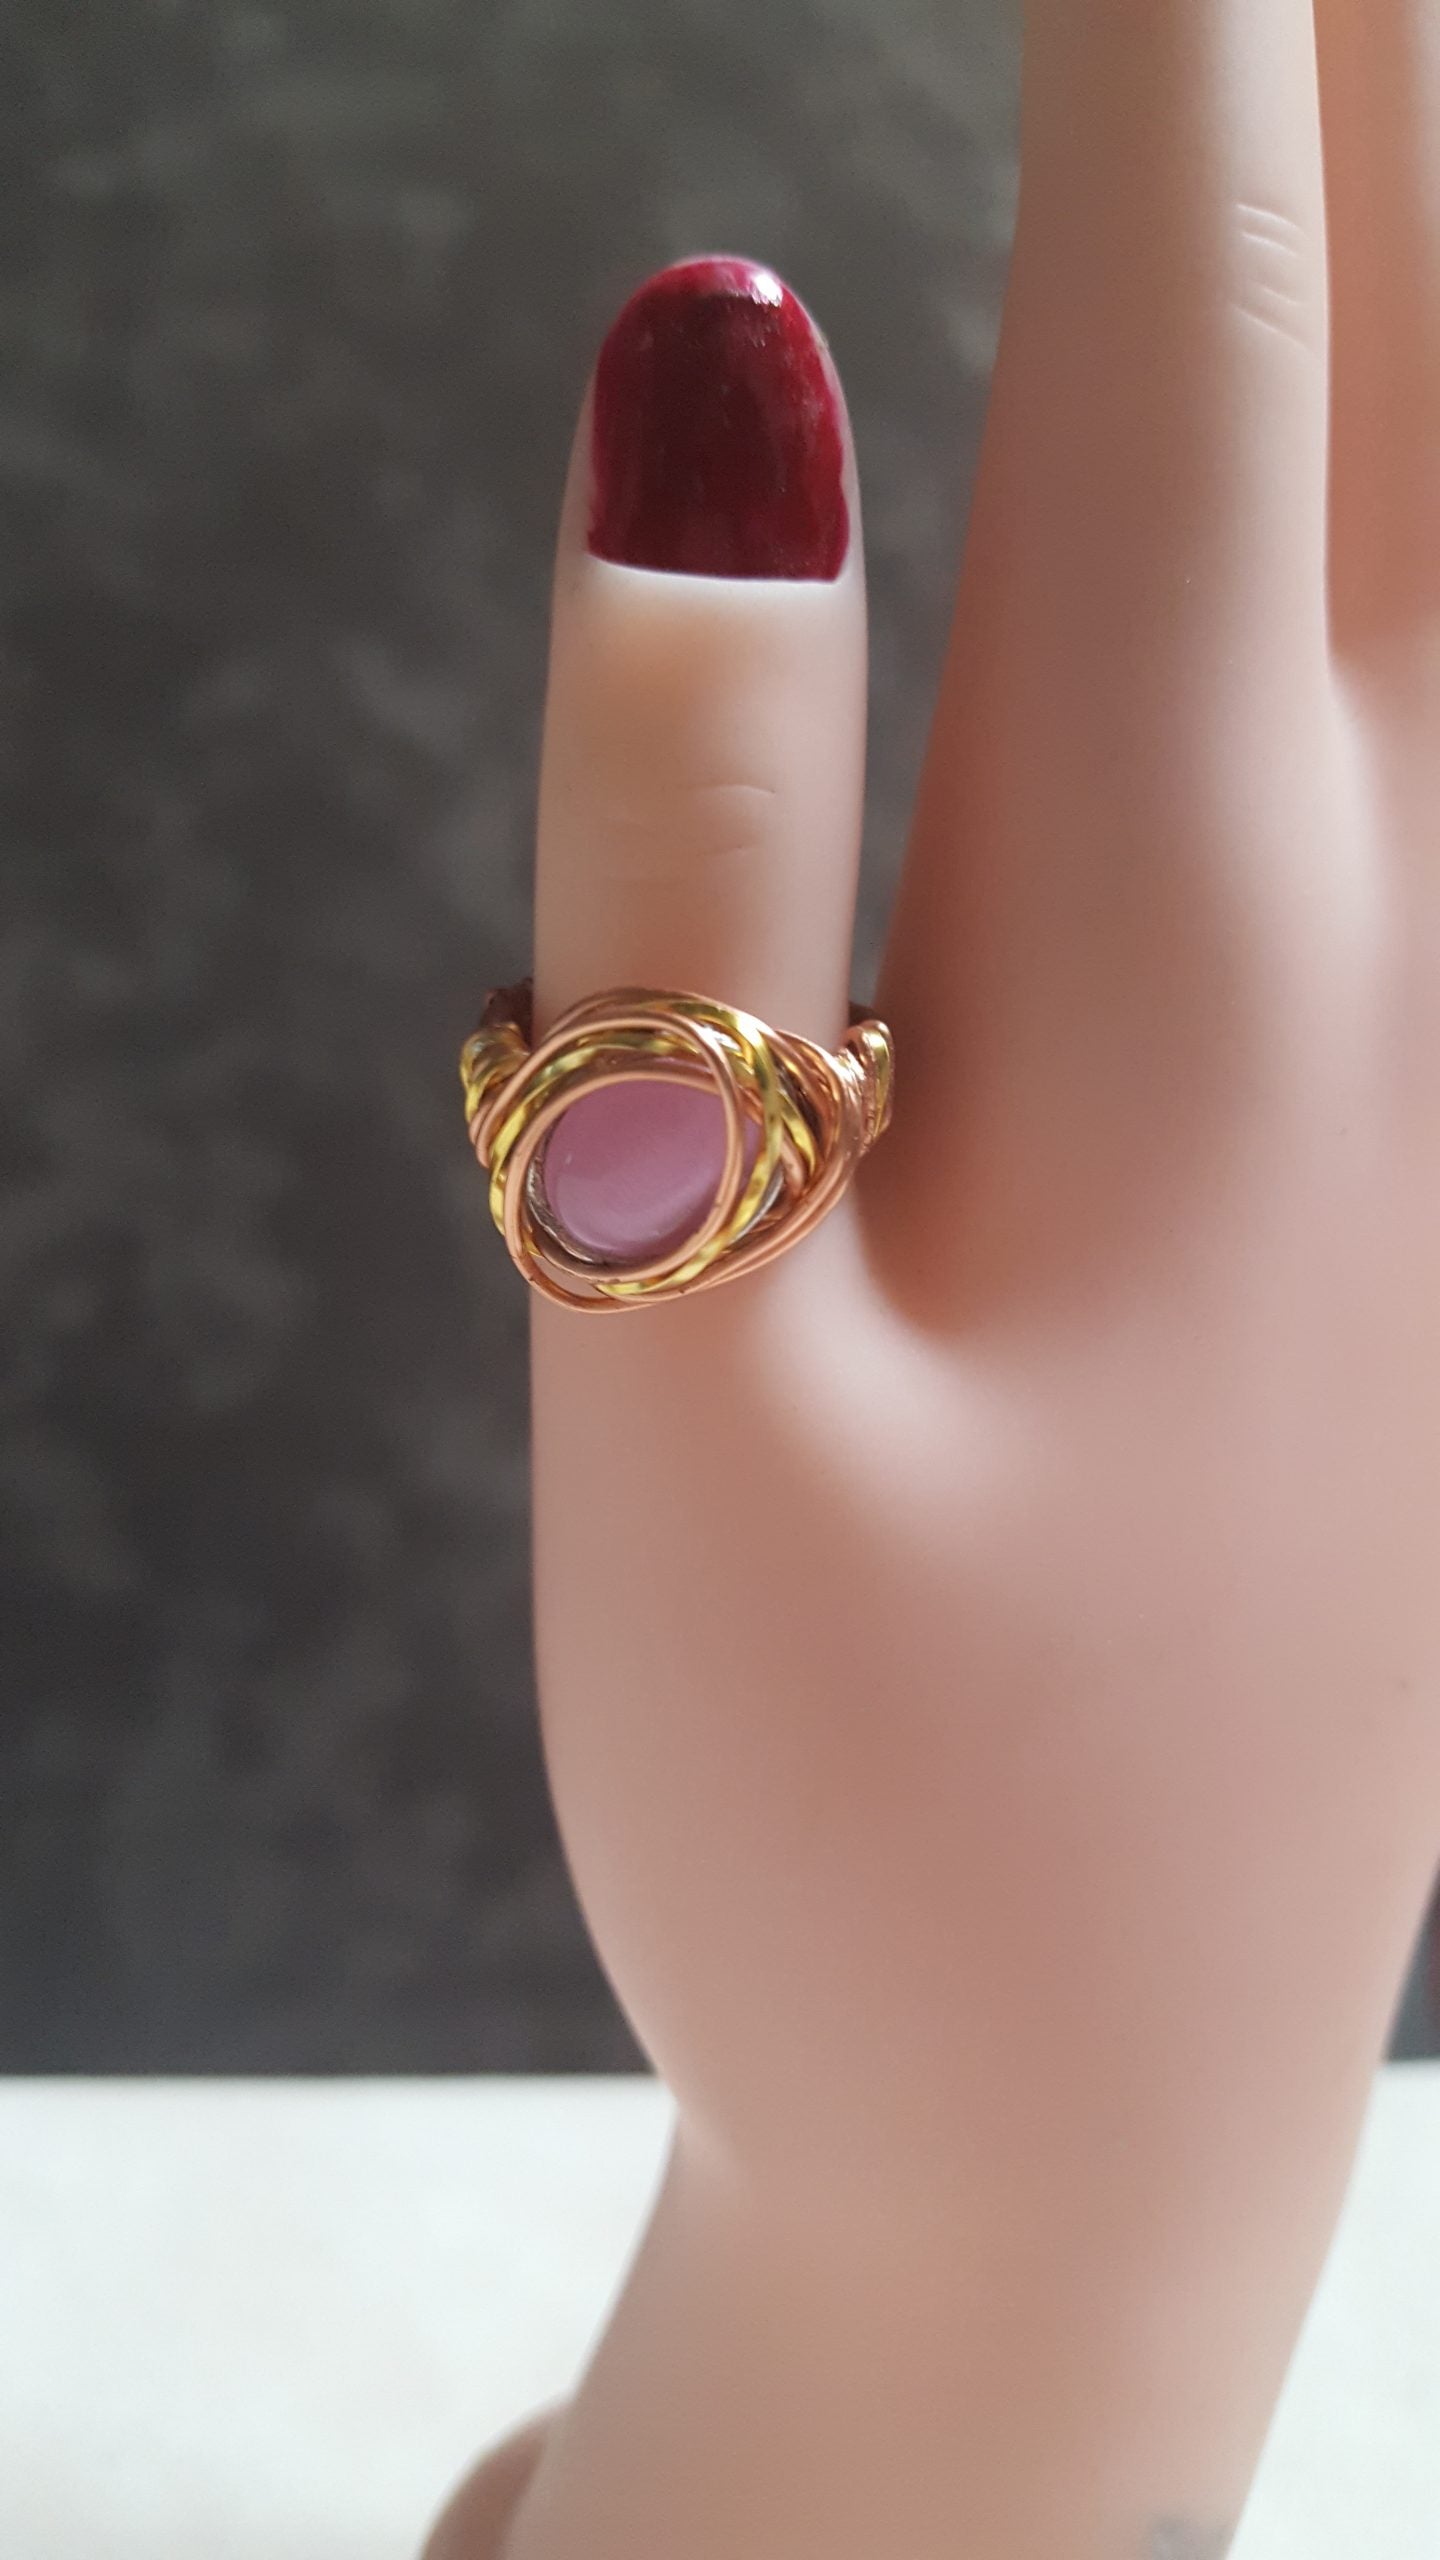 Women's Rings Handcrafted - Women's Gold Plated and Pink adjustable swirl ring